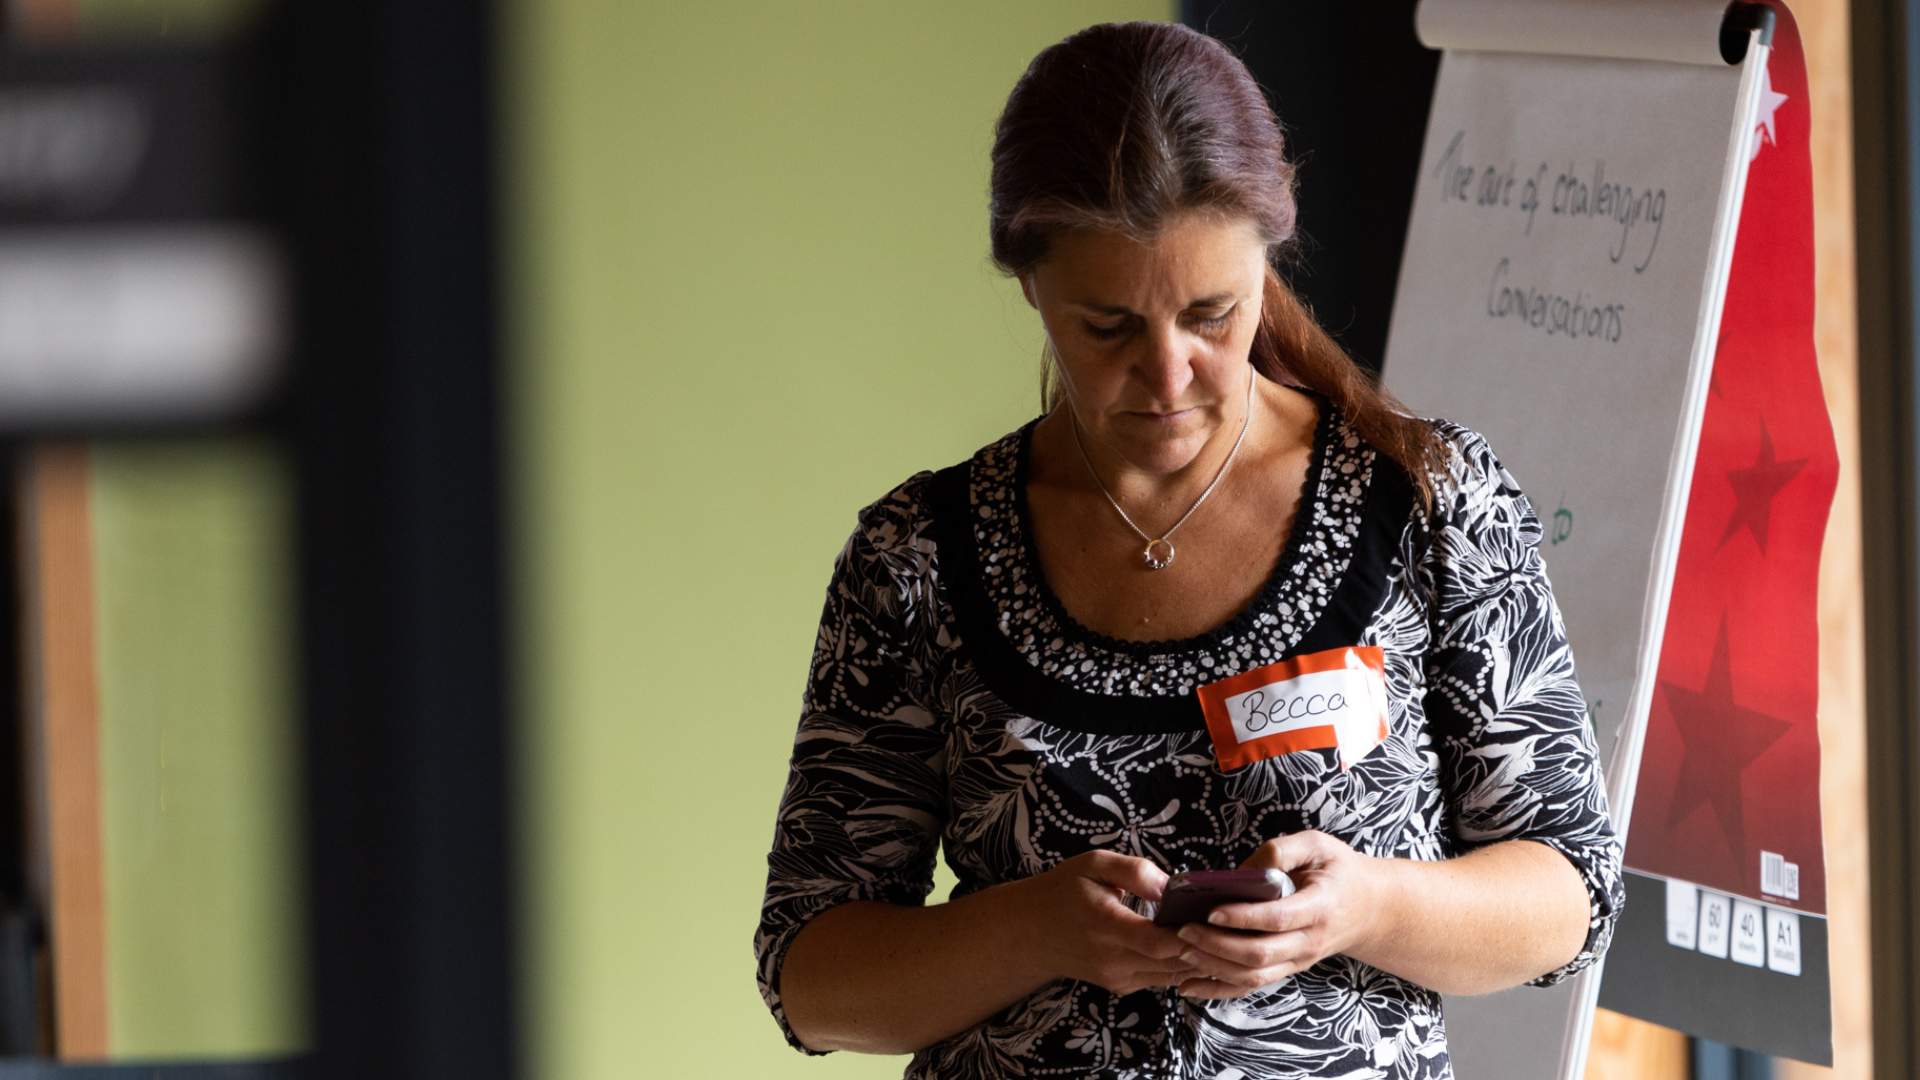 Becca is checking her mobile phone during a break between the workshops she facilitated at the Big Day Out 2022